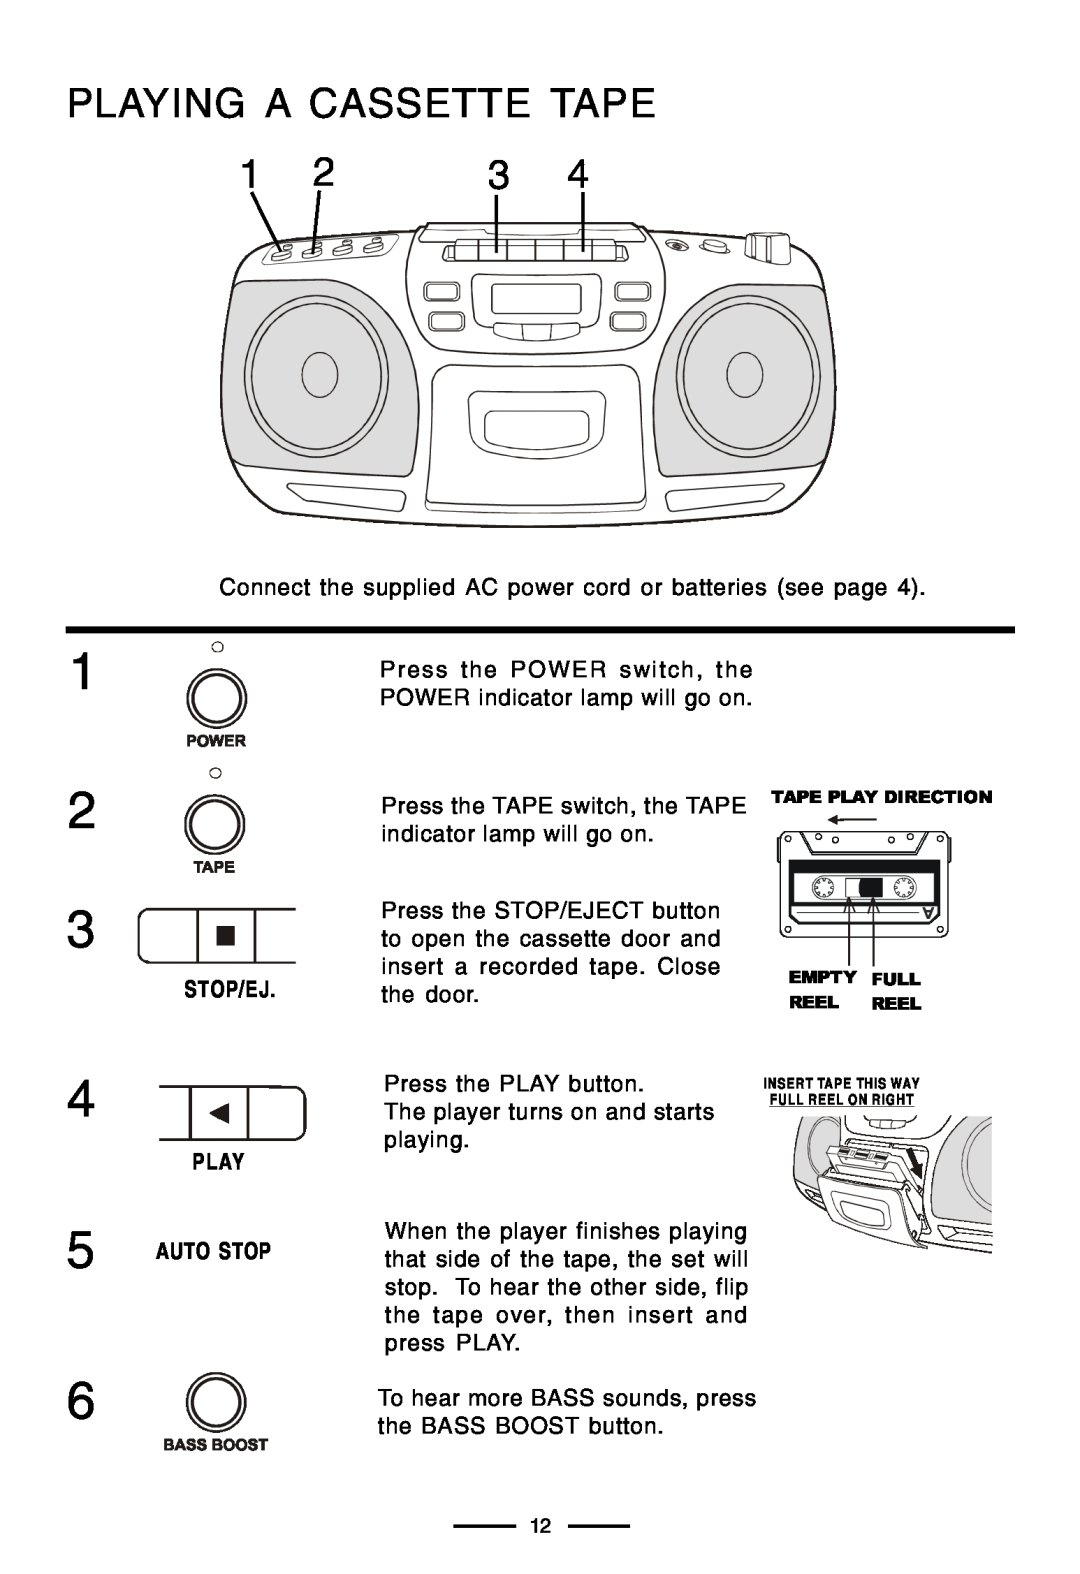 Lenoxx Electronics CD-210 manual Playing A Cassette Tape, Tape Play Direction Empty Full Reel Reel 